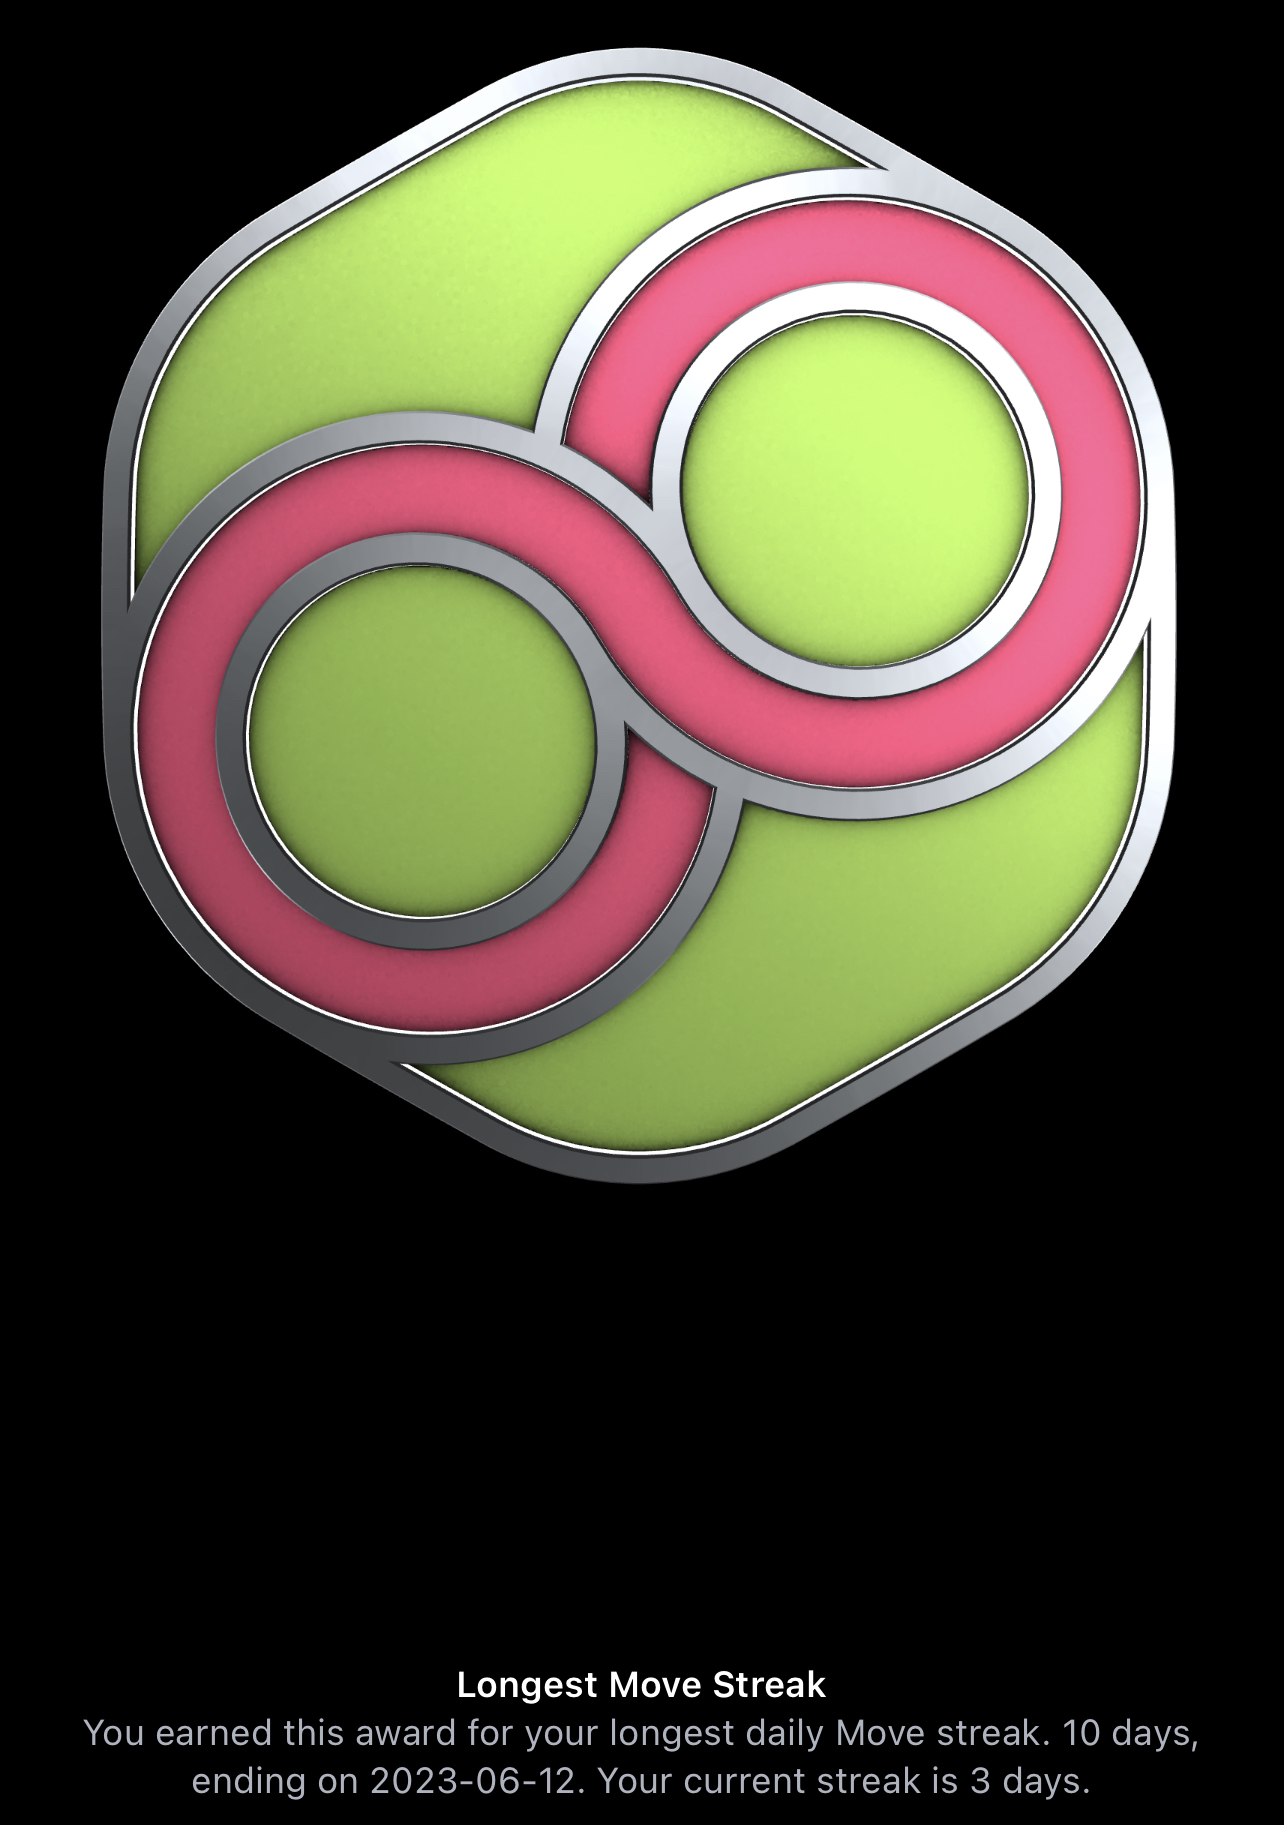 A screenshot of the Apple Fitness Longest Move Streak trophy with a dialogue underneath that states "You earned this award for your longest daily Move streak. 10 days, ending on 2023-06-12. Your current streak is 3 days."